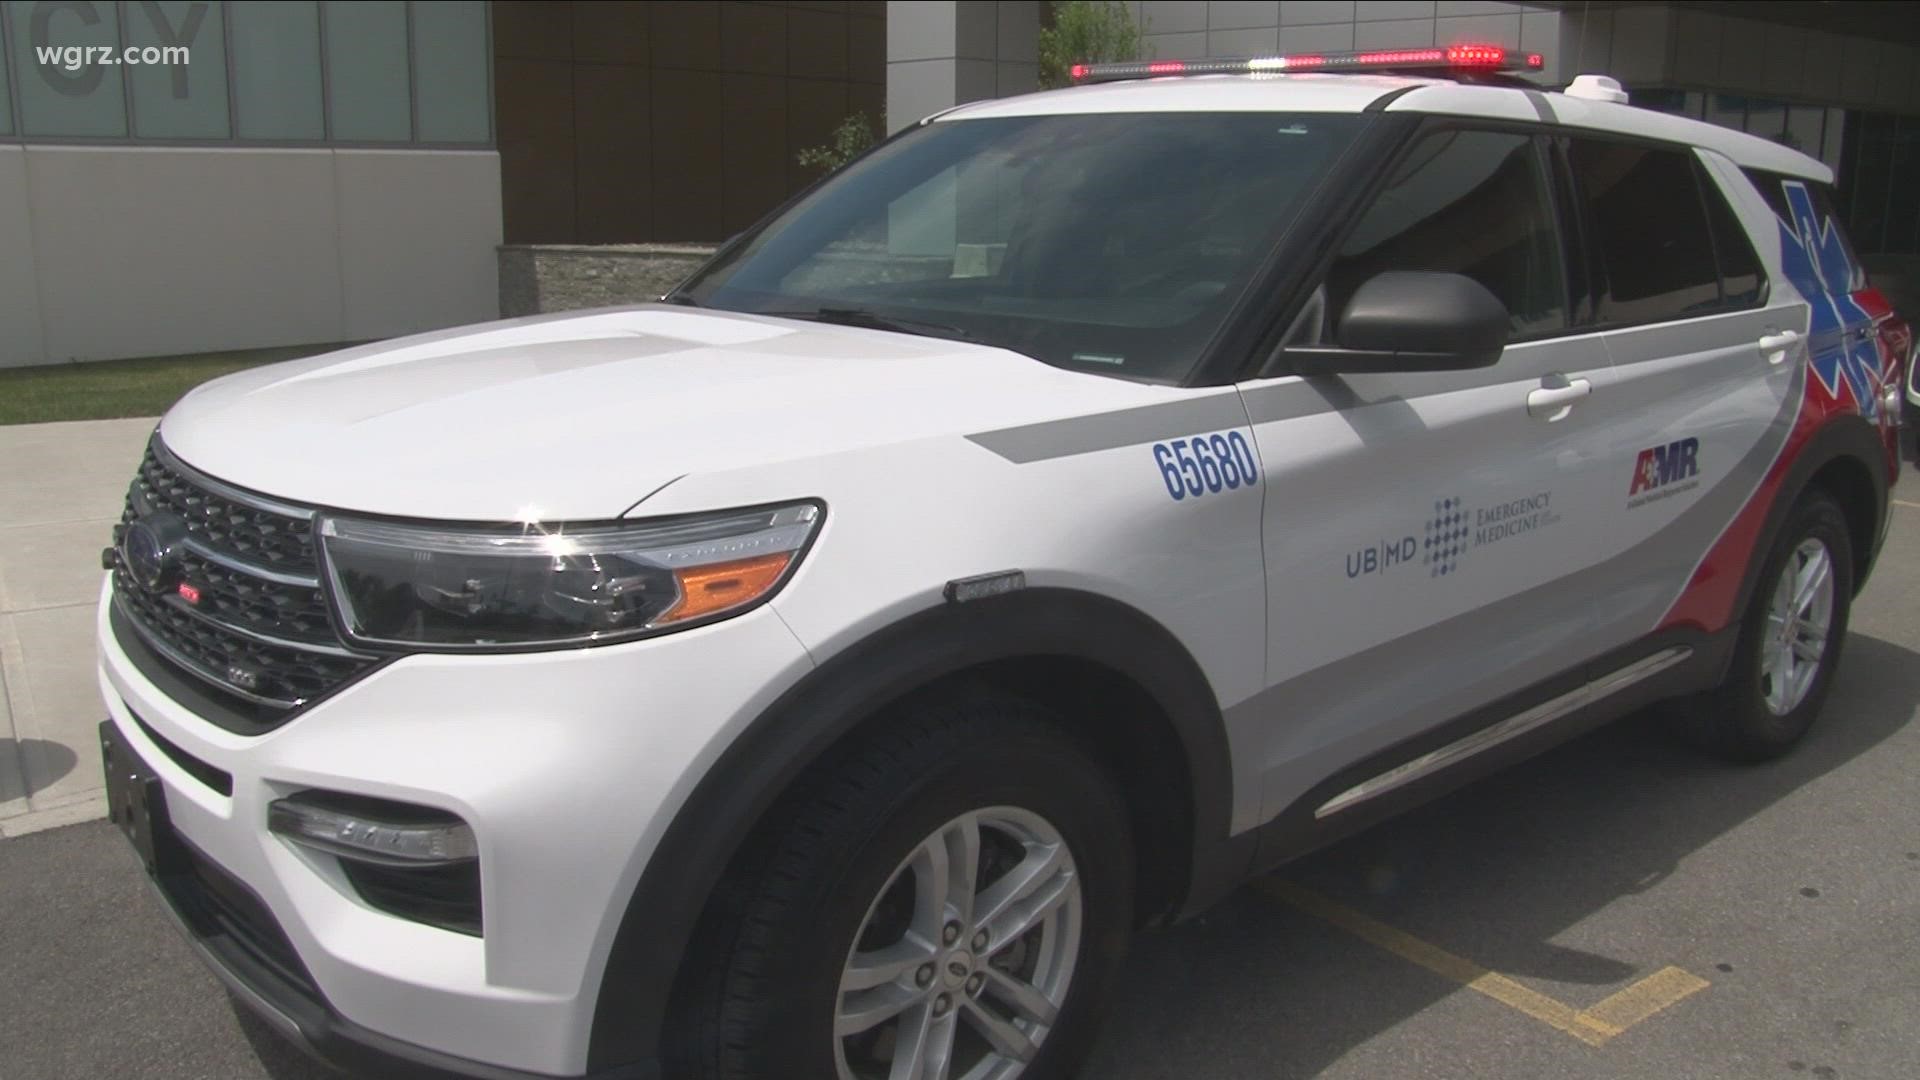 A new AMR vehicle is set to hit the road soon where instead of paramedics driving, it's a doctor driving. Meant to help aid and provide care "on the spot".